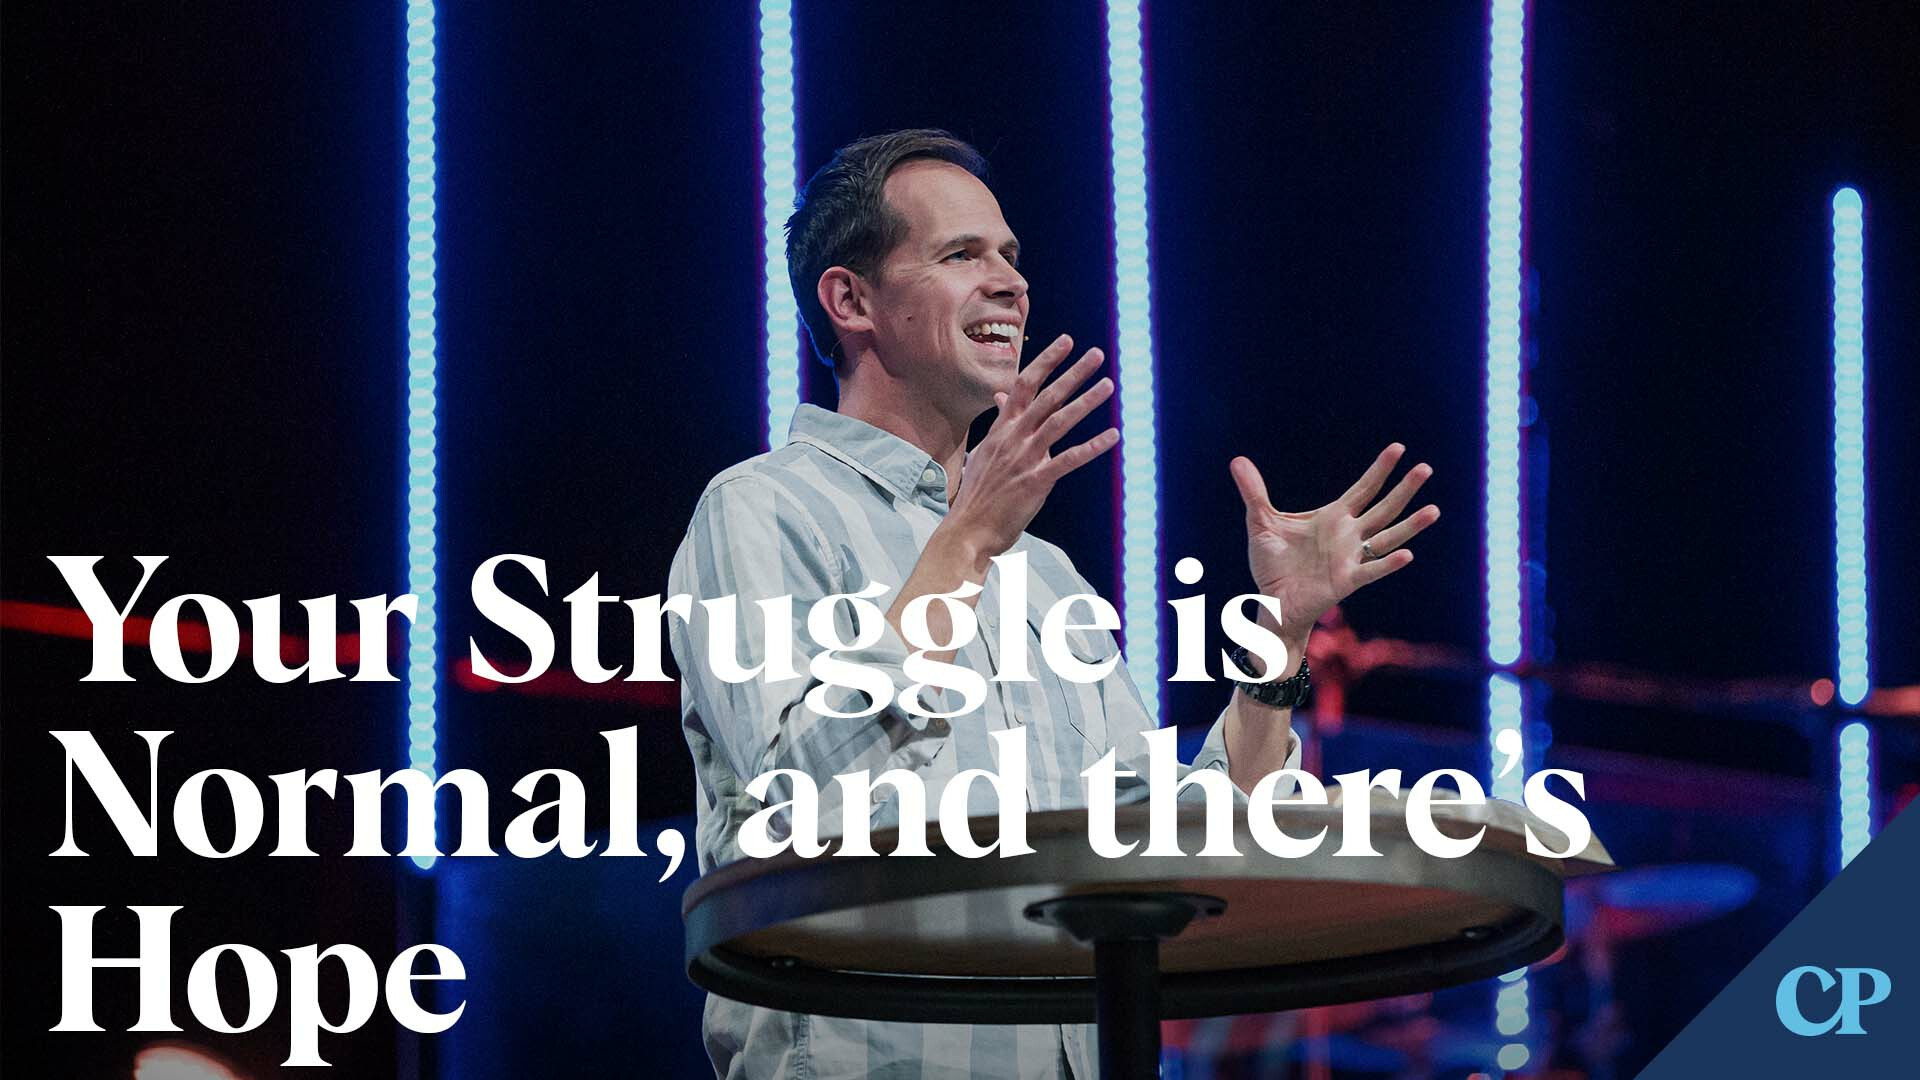 View Message: Your Struggle is Normal, and there’s Hope